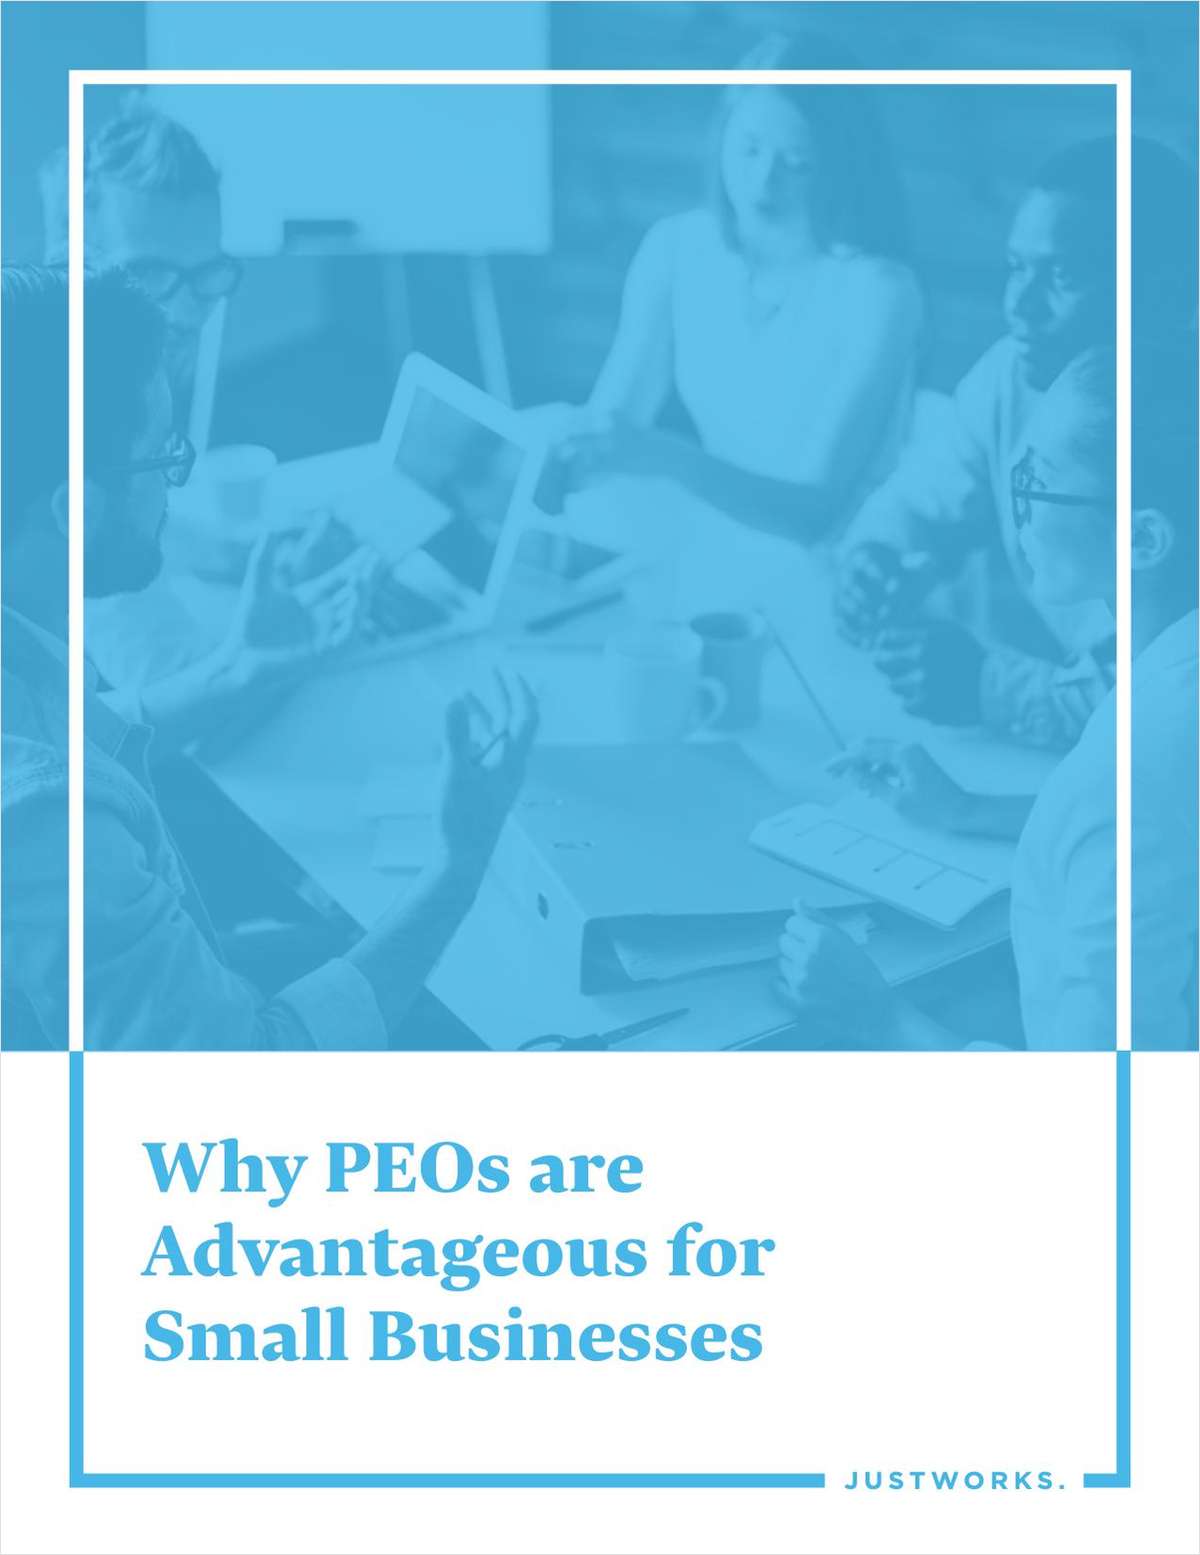 Why PEOs are Advantageous for Small Businesses